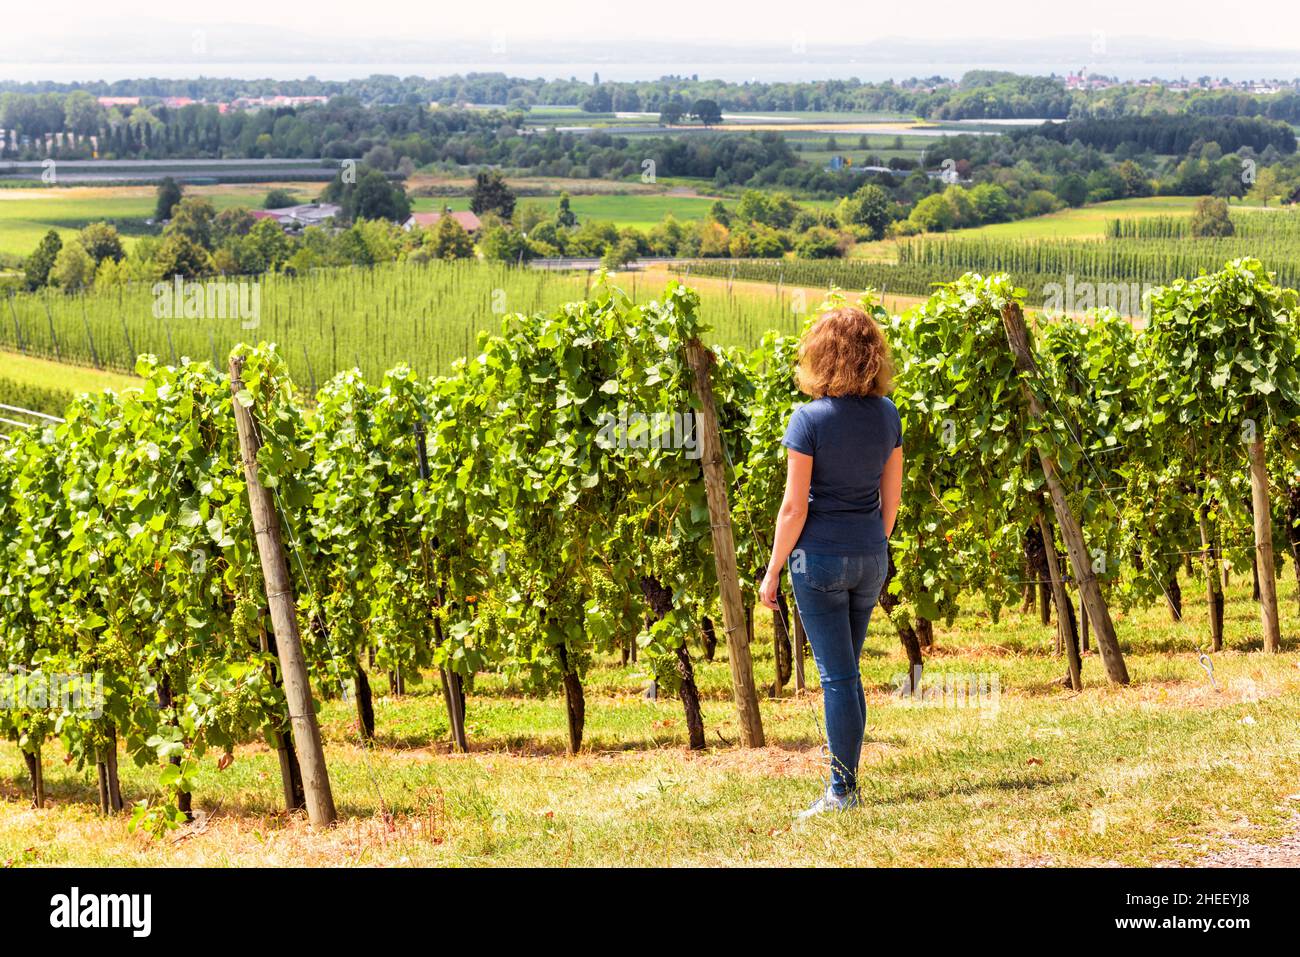 Vineyard rows overlooking grape fields, young woman looks at green vine plantations. Panorama of vineyards in valley. Concept of viticulture, people i Stock Photo